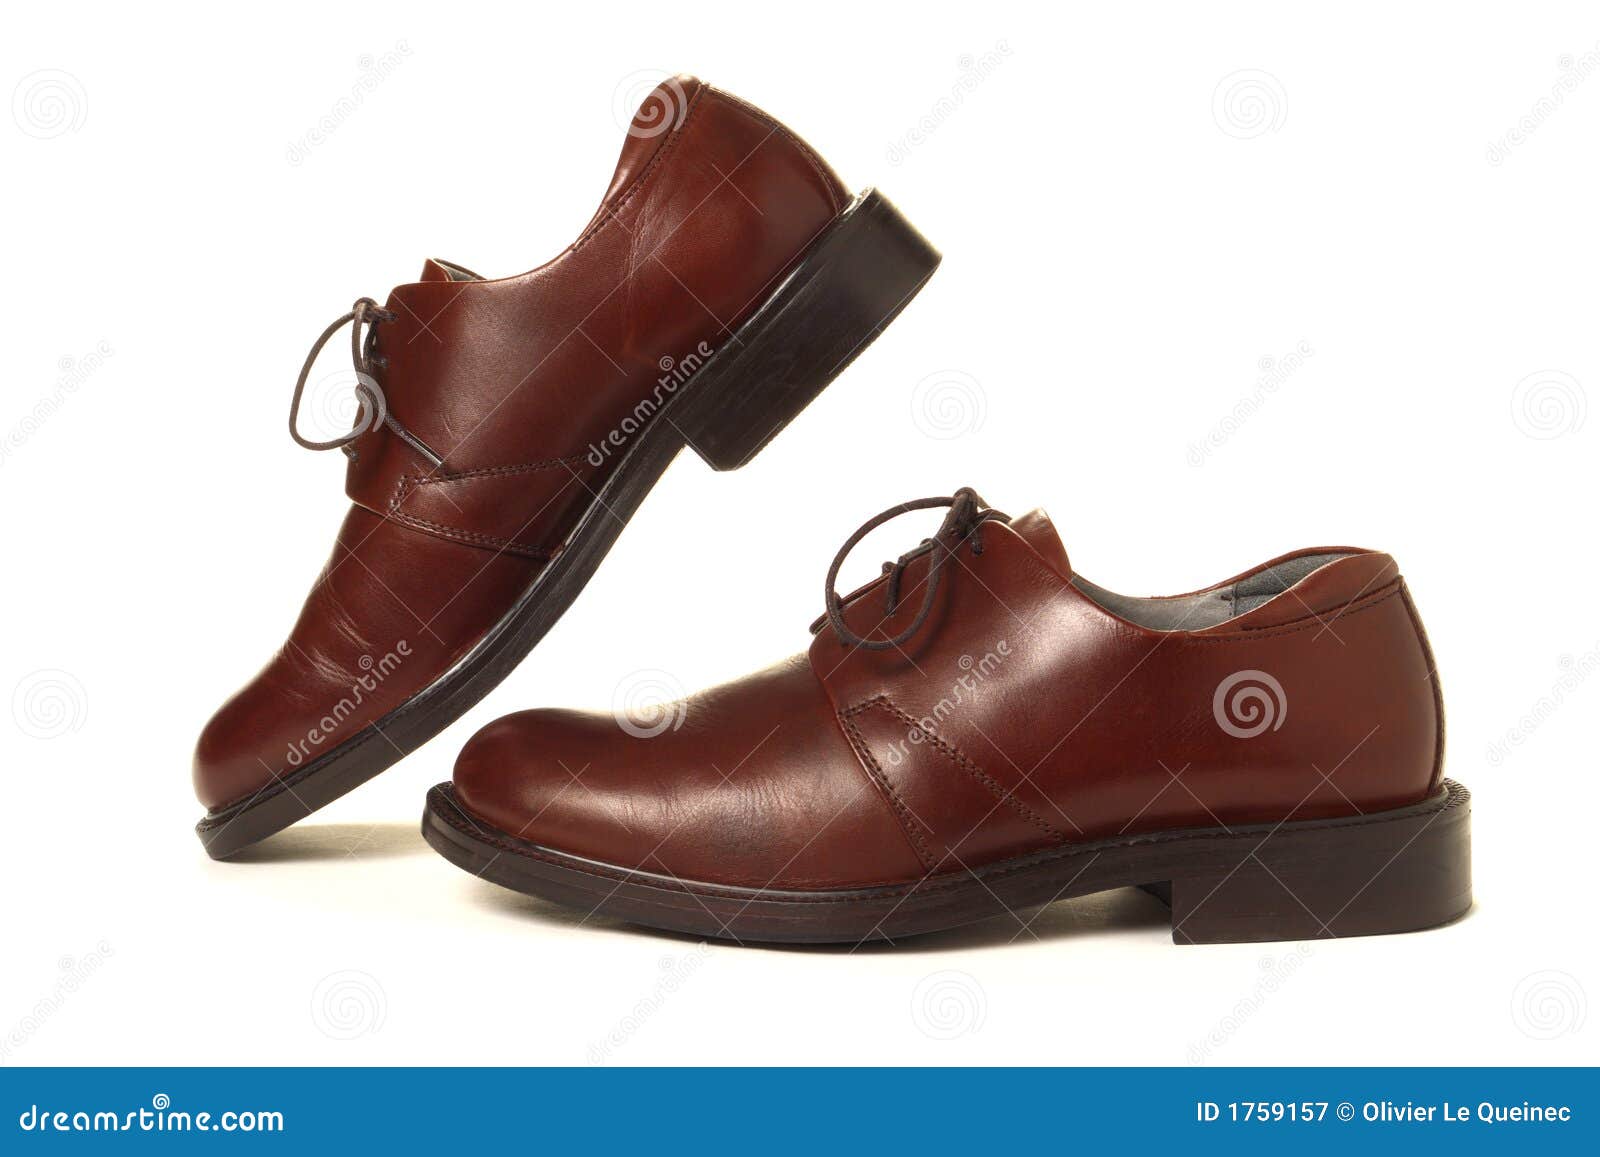 casual brown dress shoes